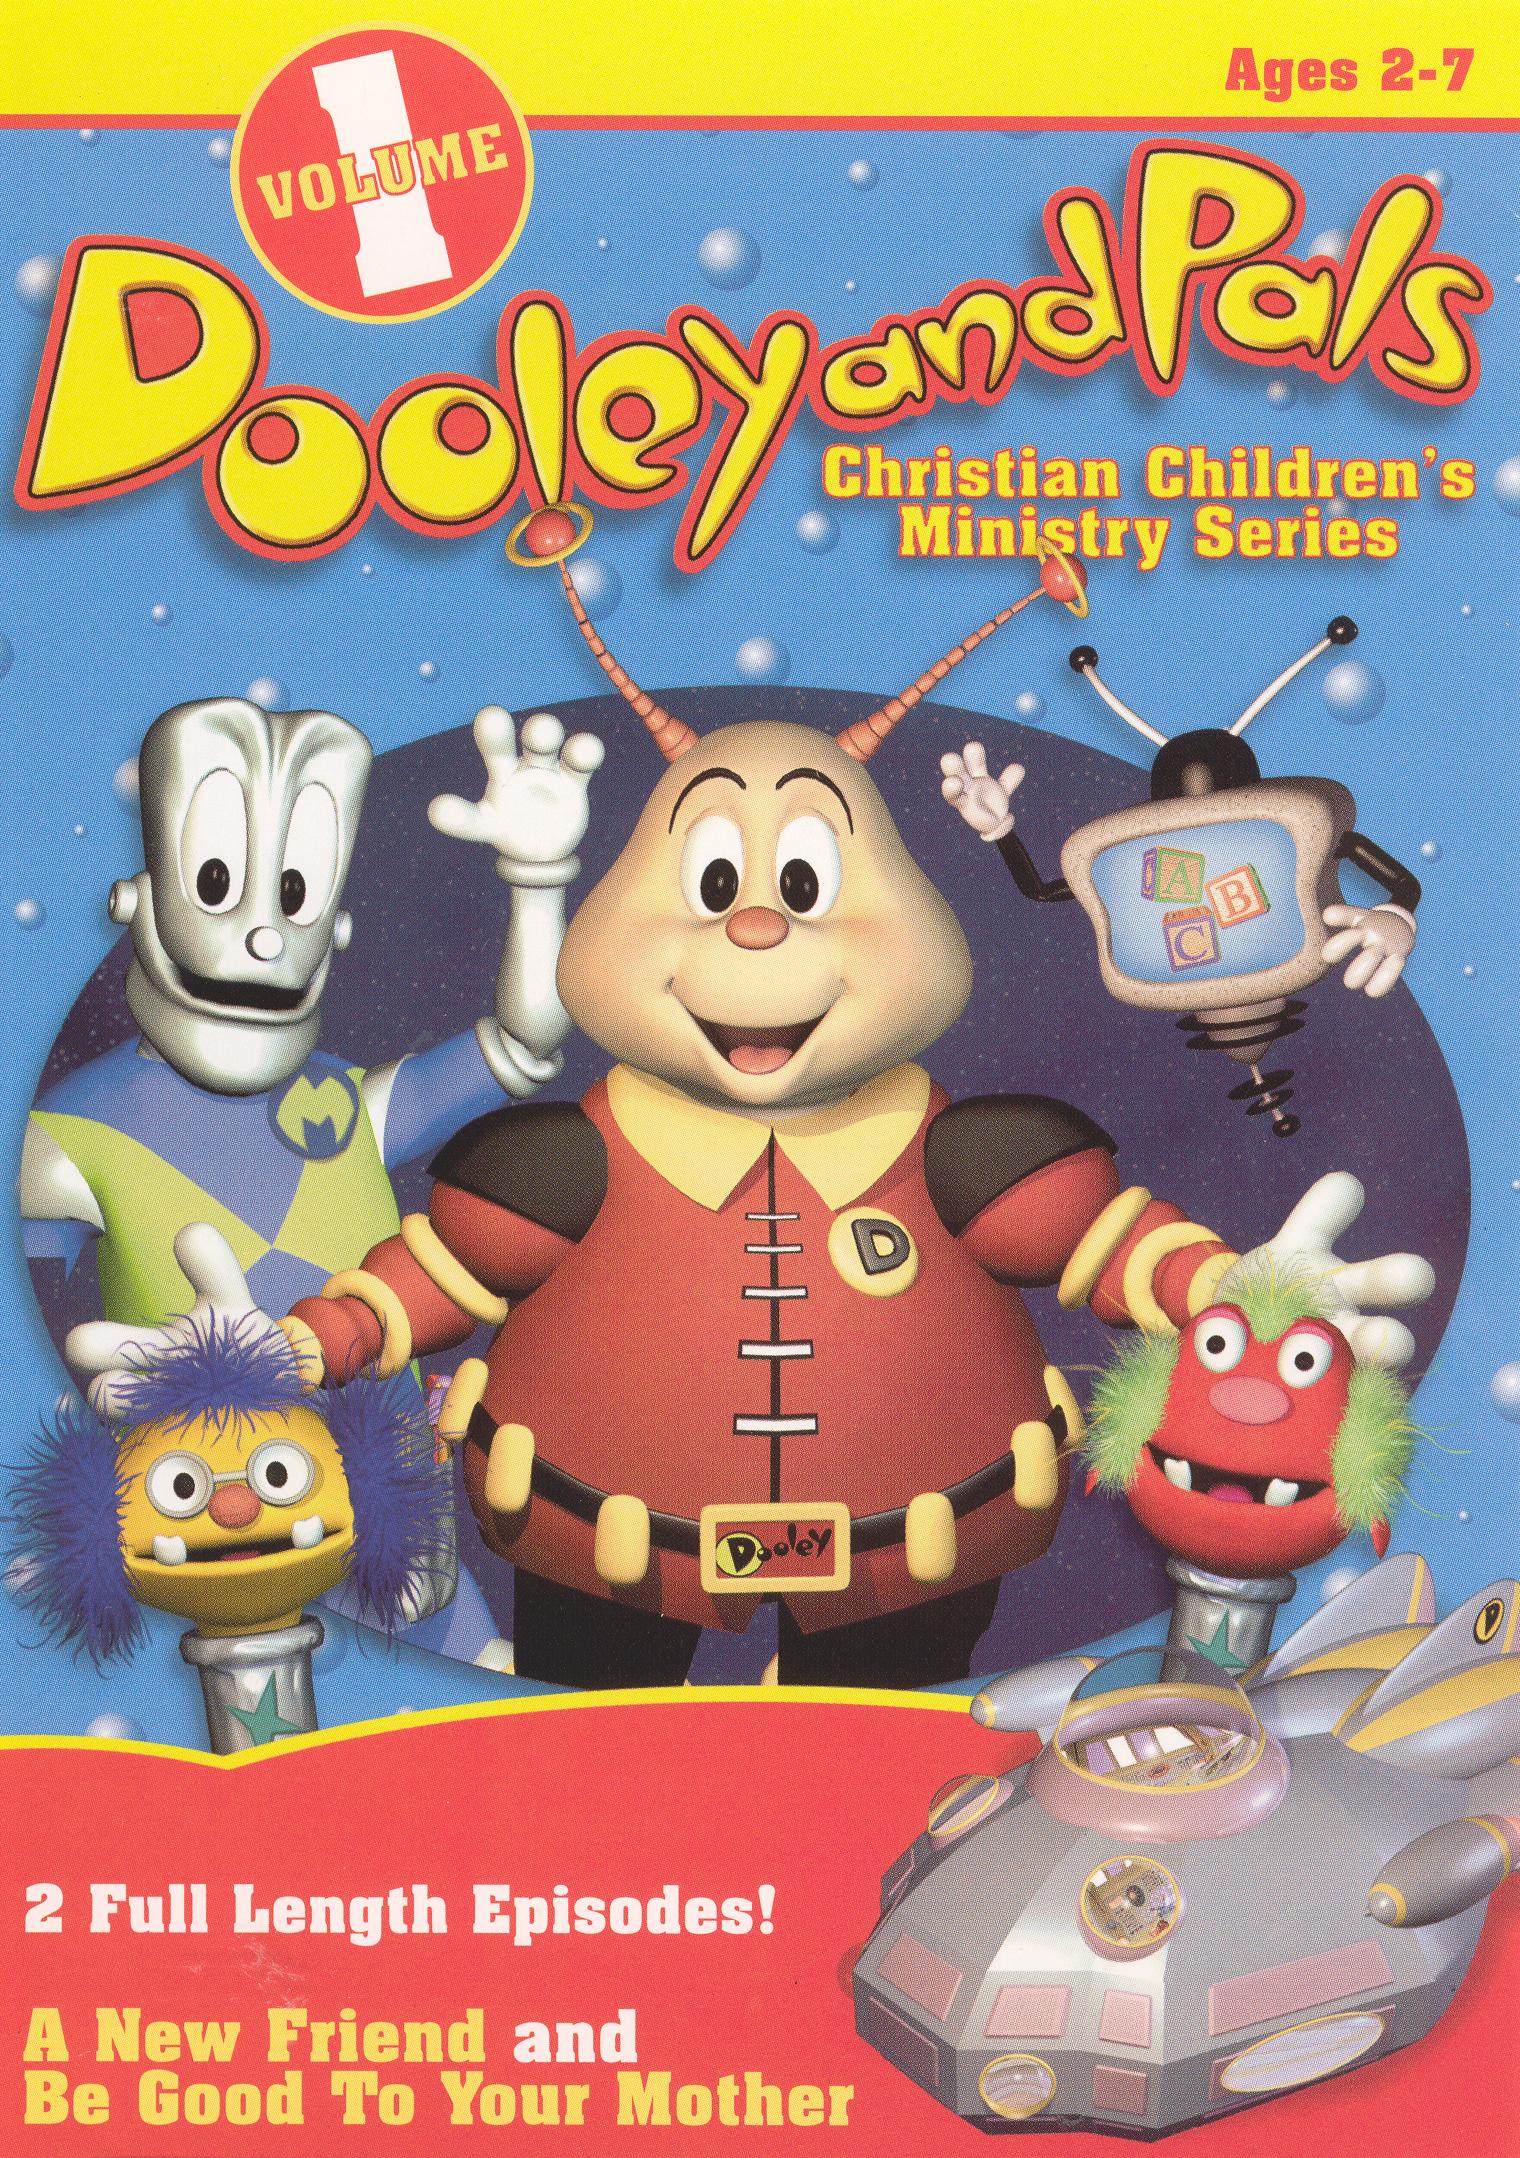 Dooley and Pals Christian Children's Ministrey Series ...